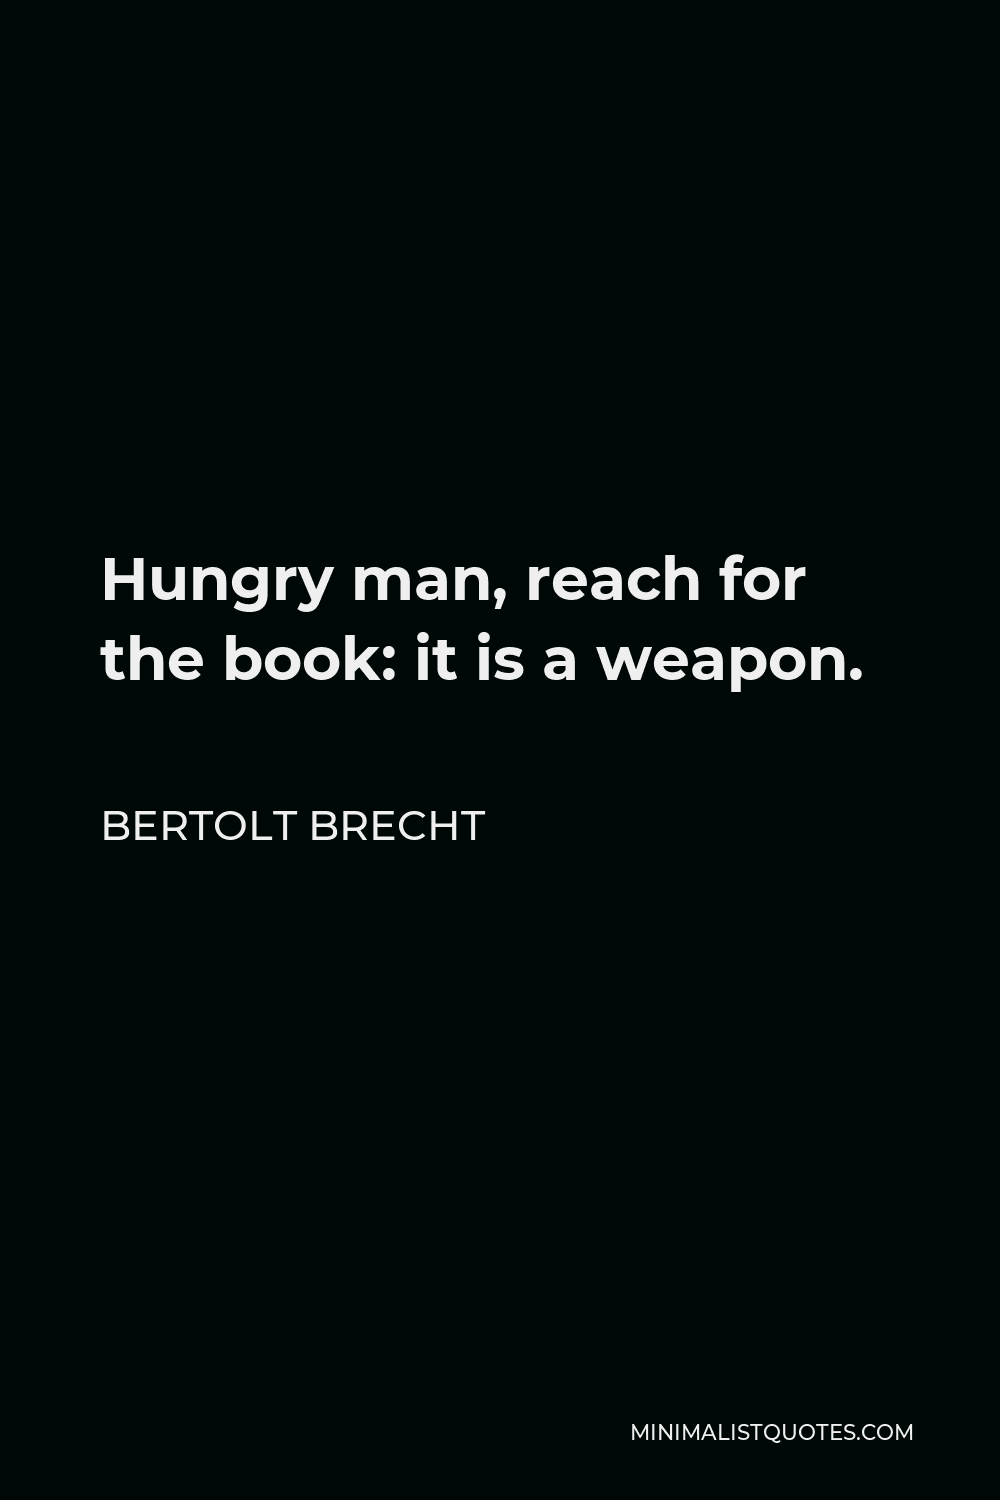 Bertolt Brecht Quote - Hungry man, reach for the book: it is a weapon.